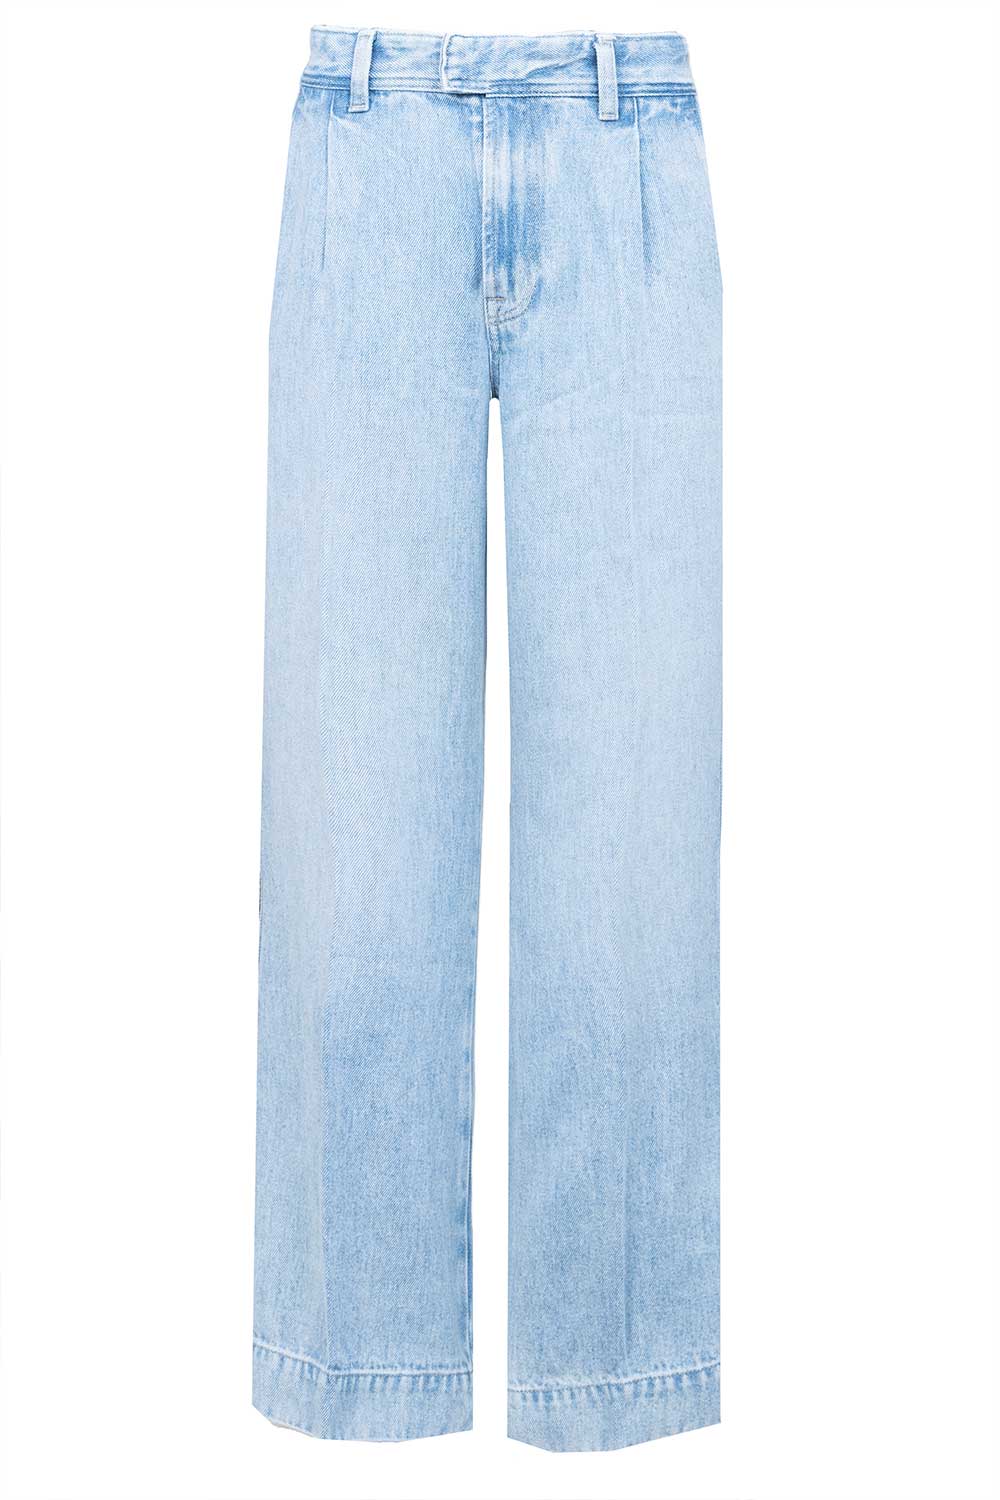 7 For All Mankind Pleated non-stretch wide leg jeans blauw